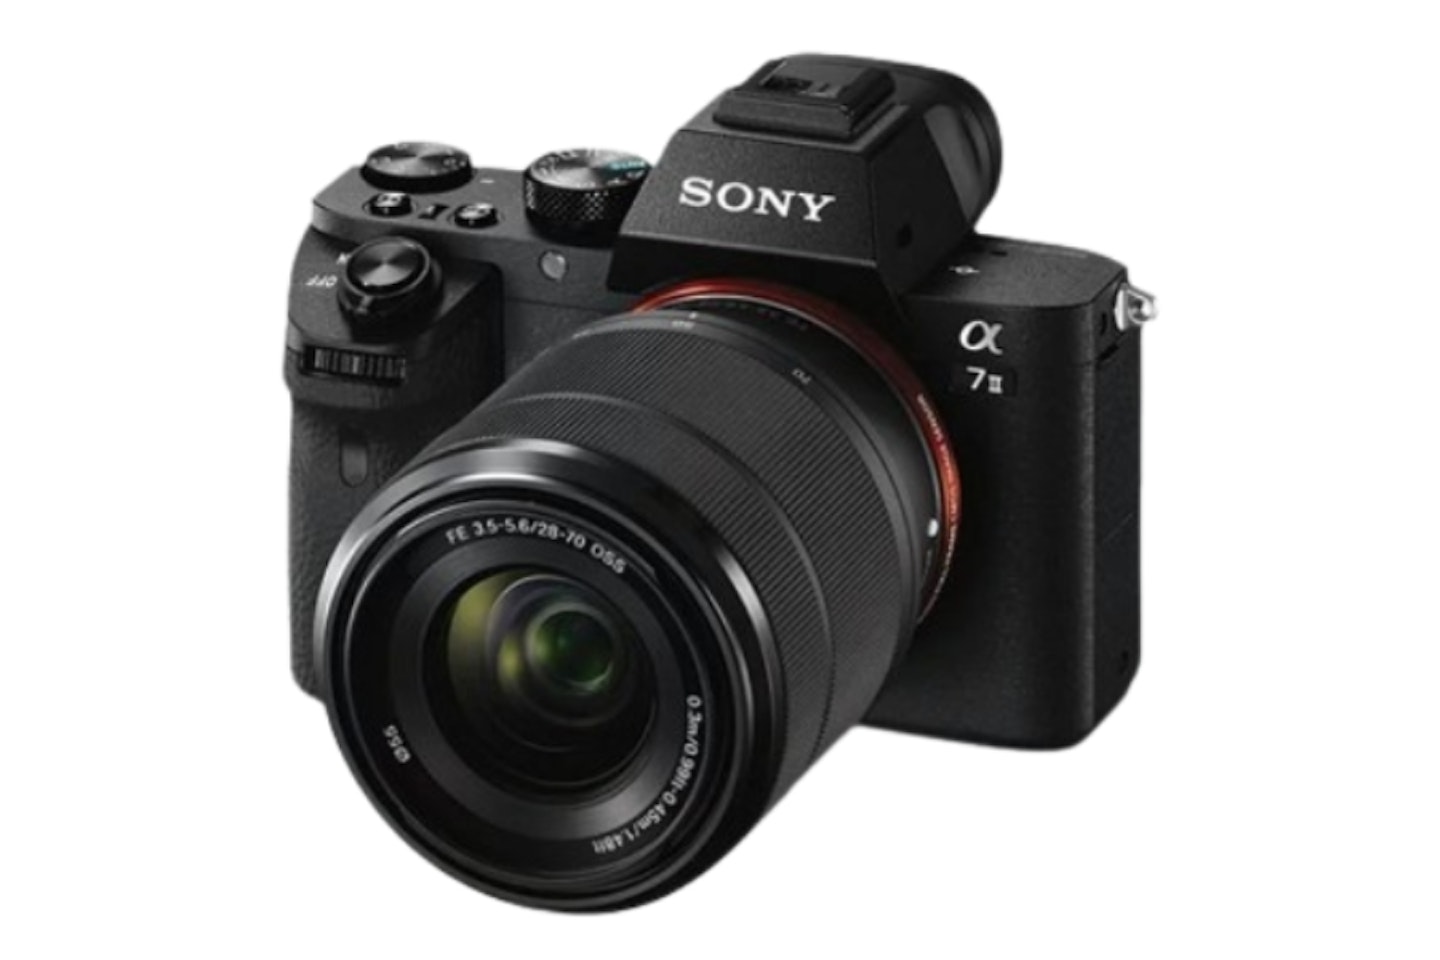 Sony A7 MkII Compact System 24.3 Megapixel Camera